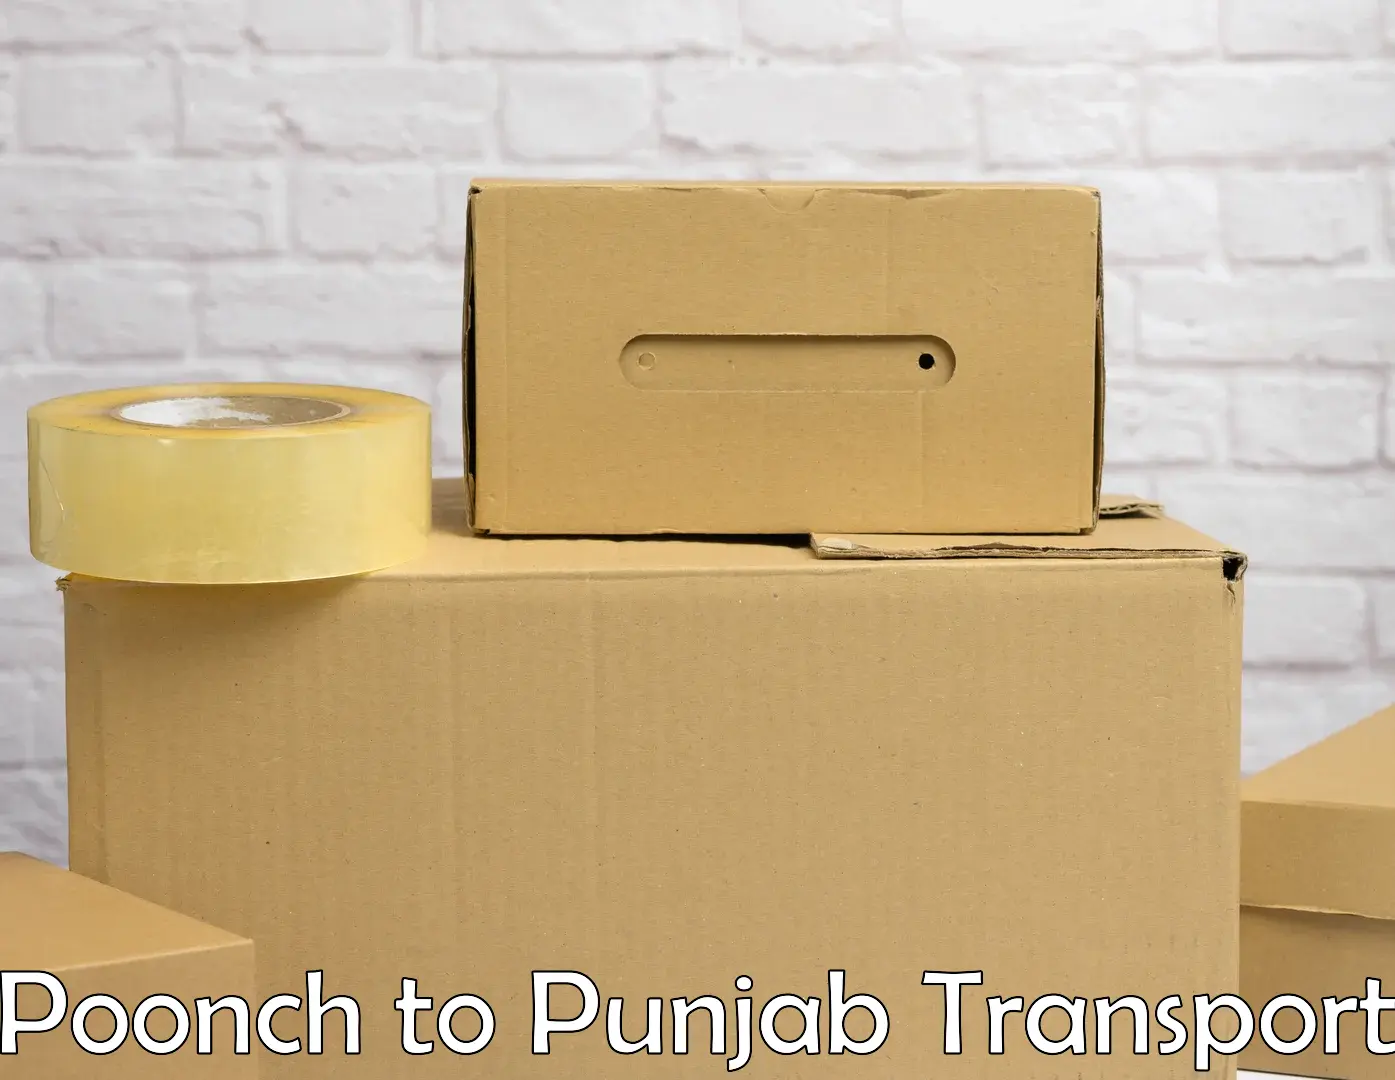 Delivery service Poonch to Punjab